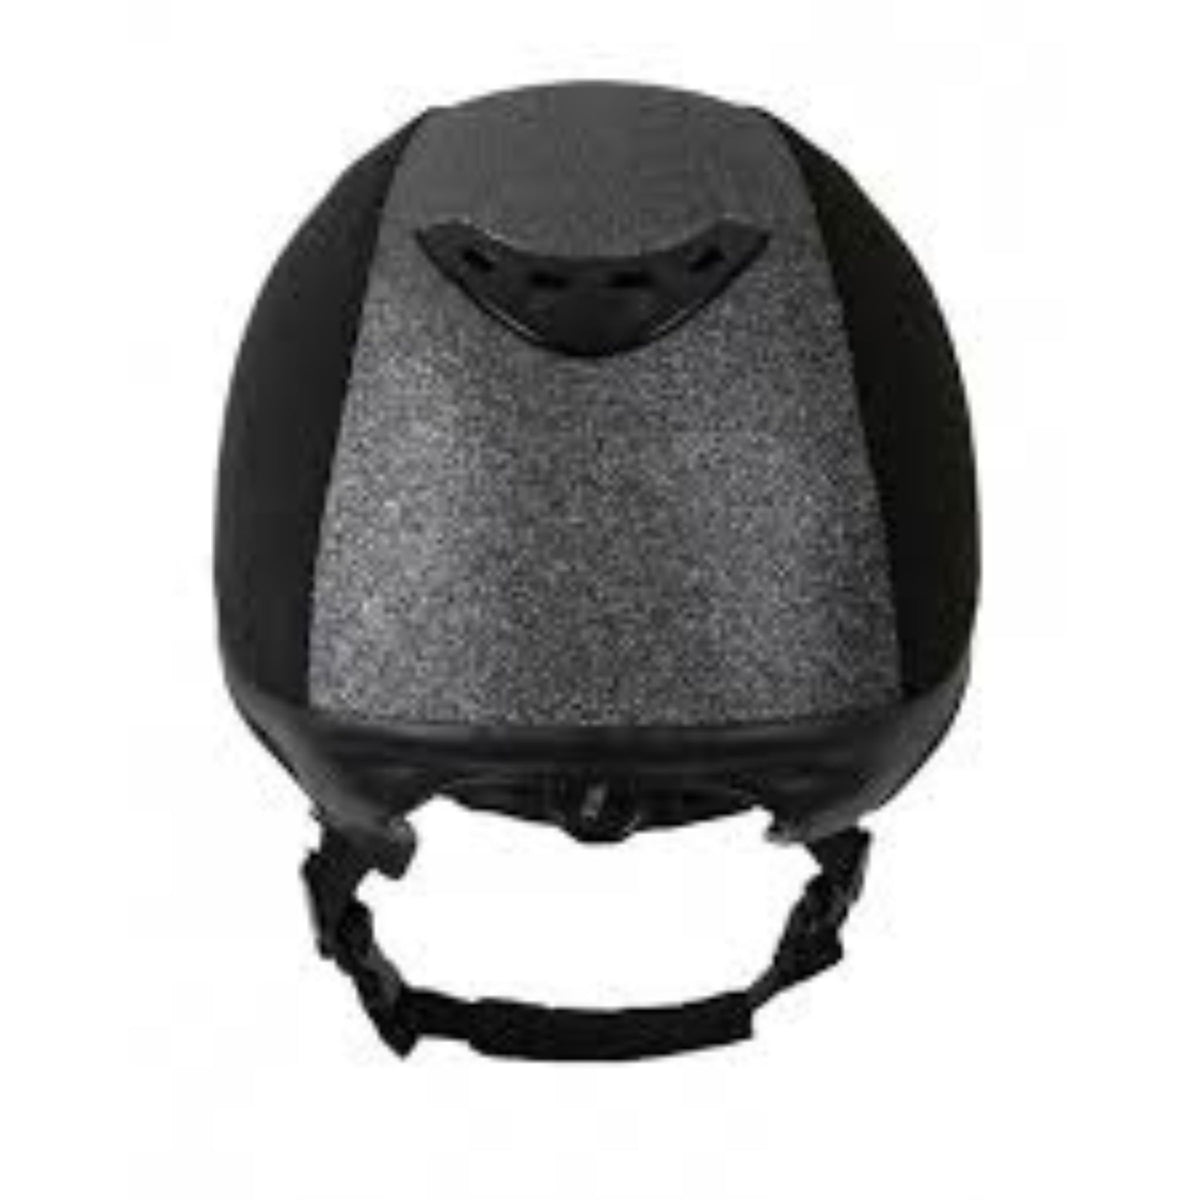 Back of black microfiber helmet with large silver section and ventilation.